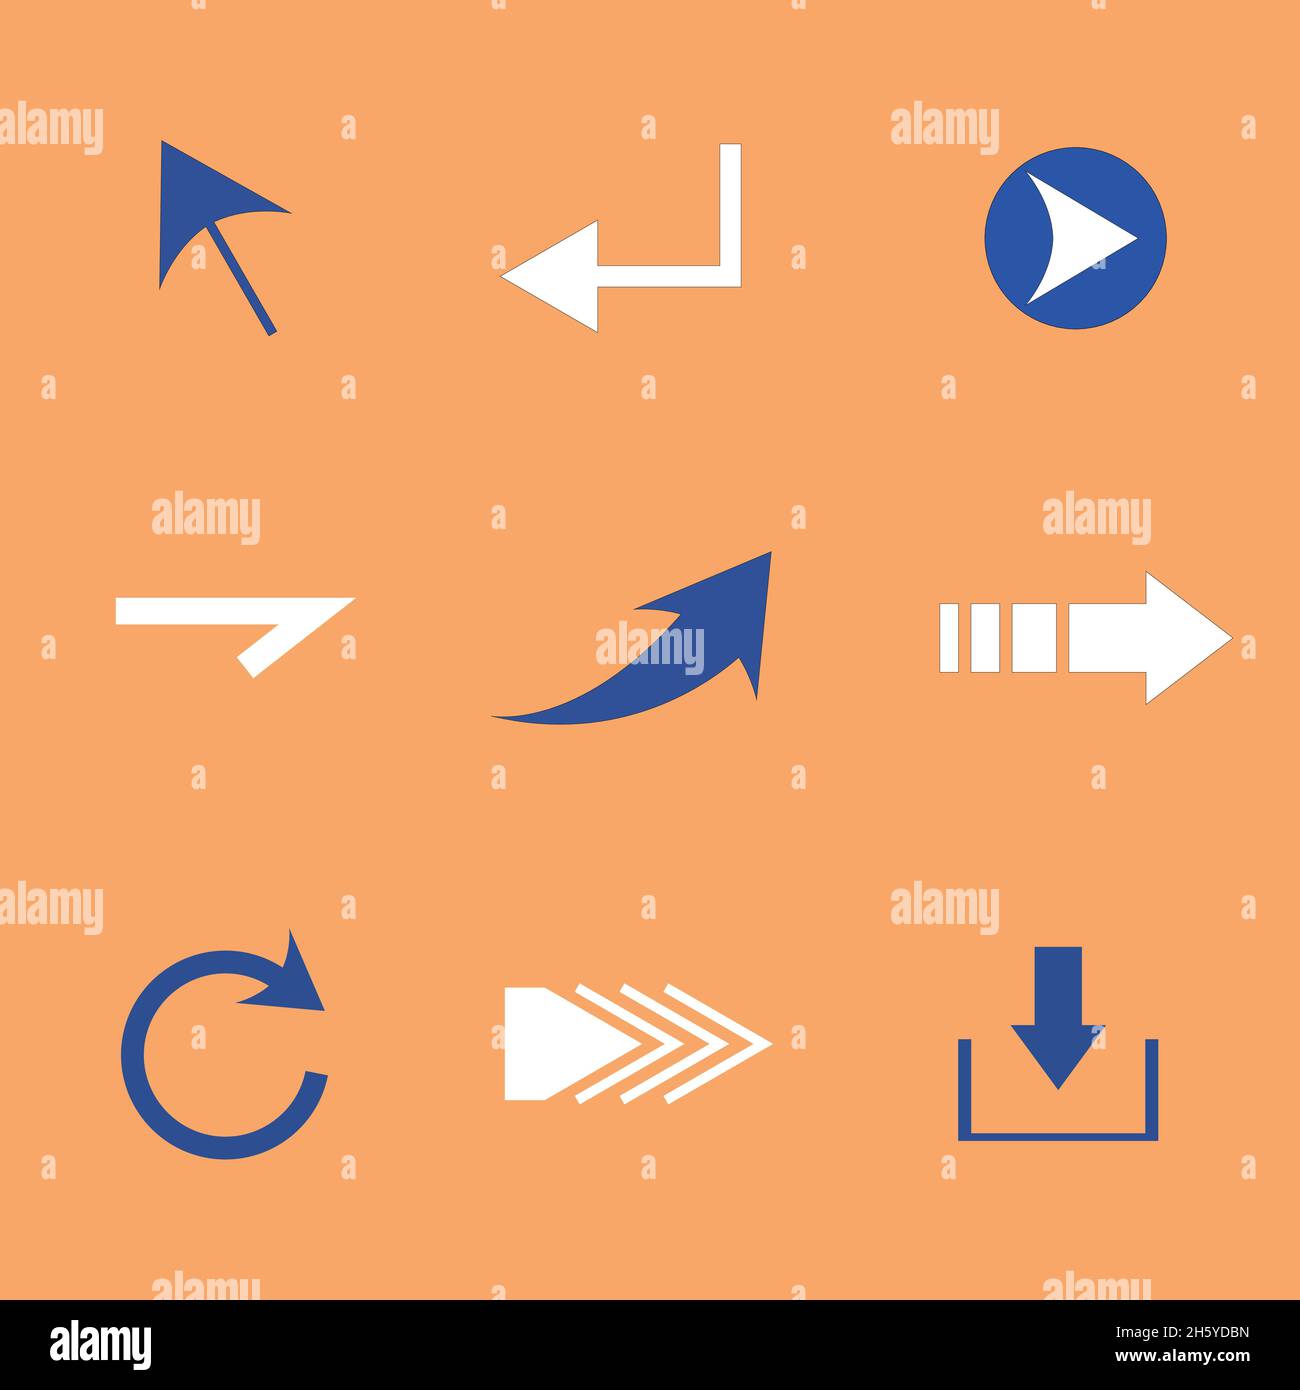 Arrow icons of various shapes. It may indicate a direction or may be used as a guide button on the Internet. Stock Vector